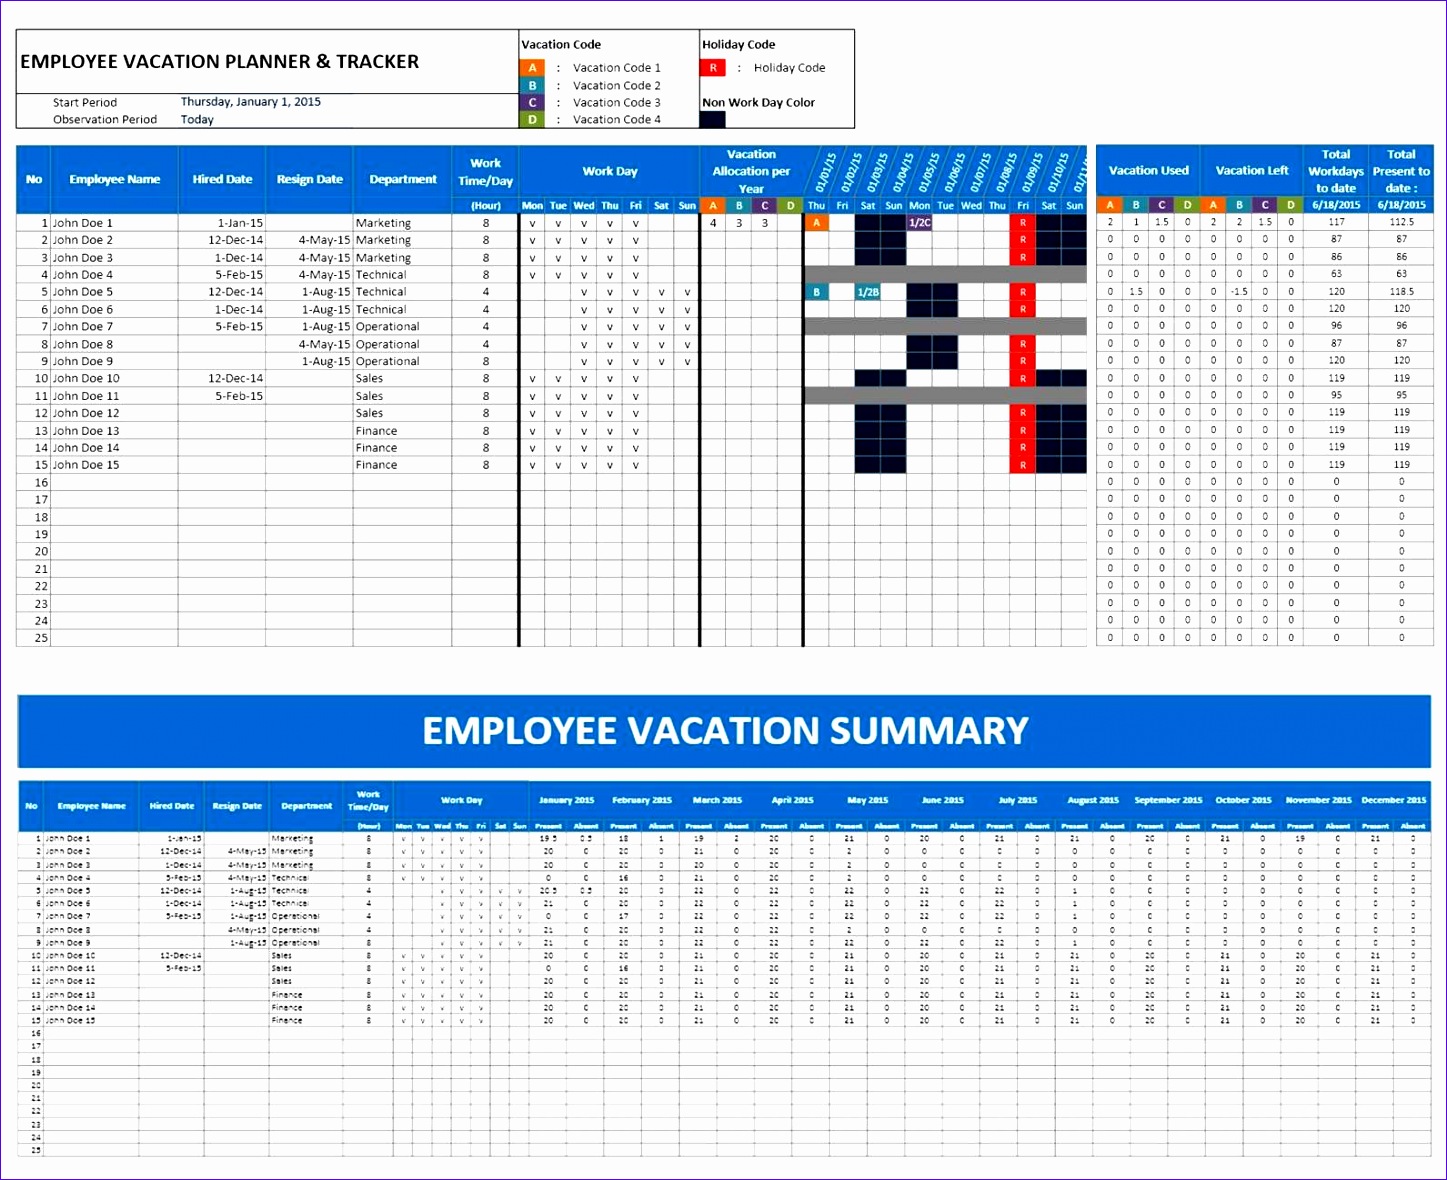 Employee Vacation Planner2